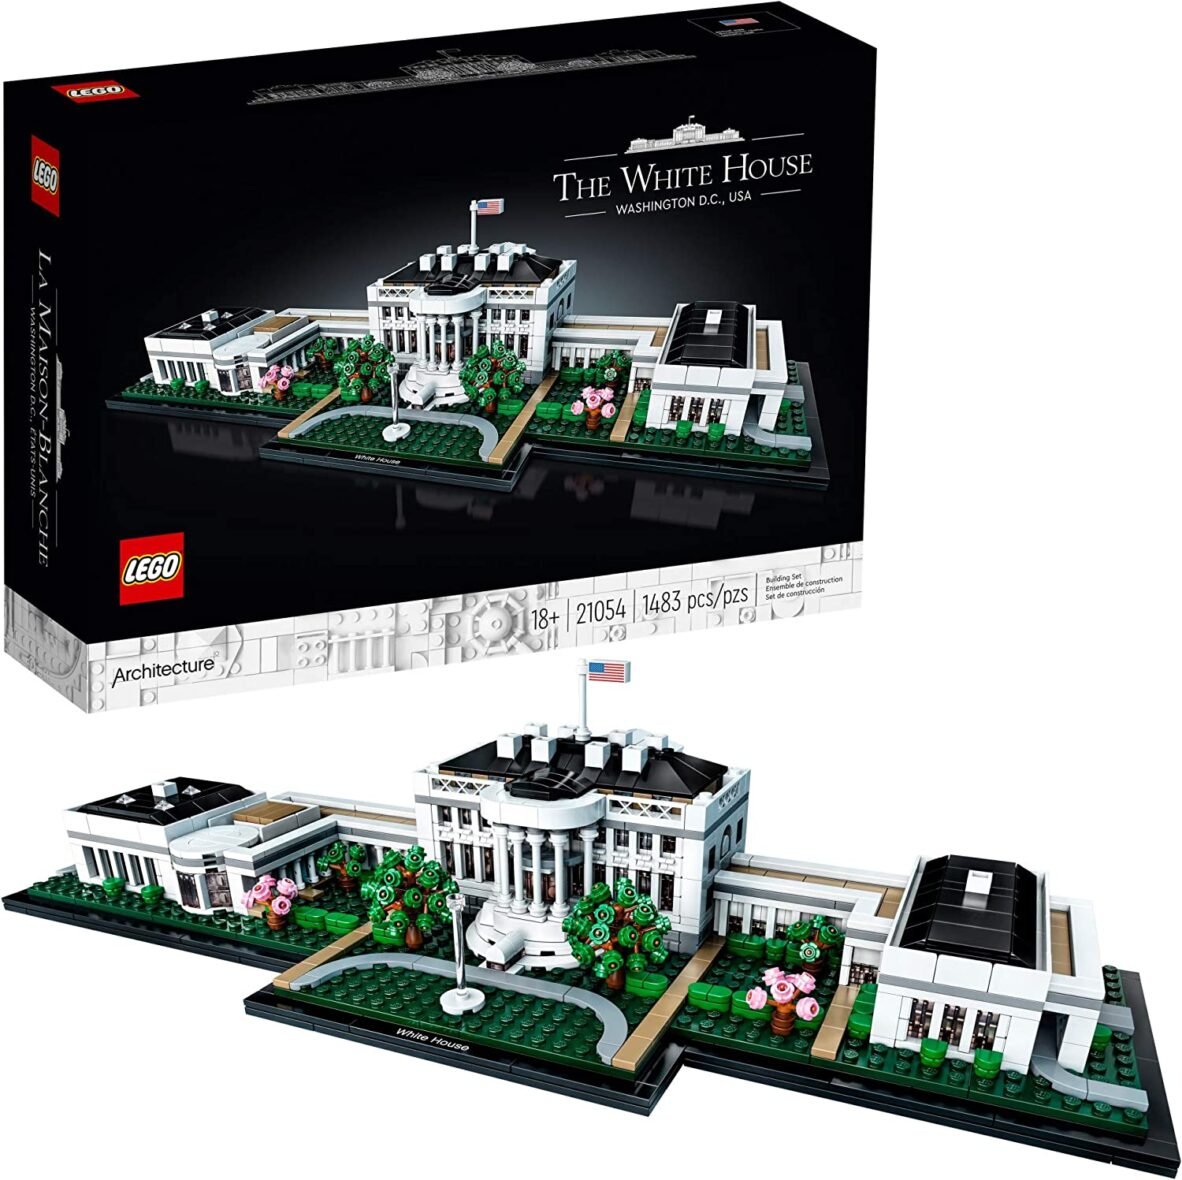 LEGO Architecture Collection: The White House 21054 Model Building Kit (1,483 Pieces)